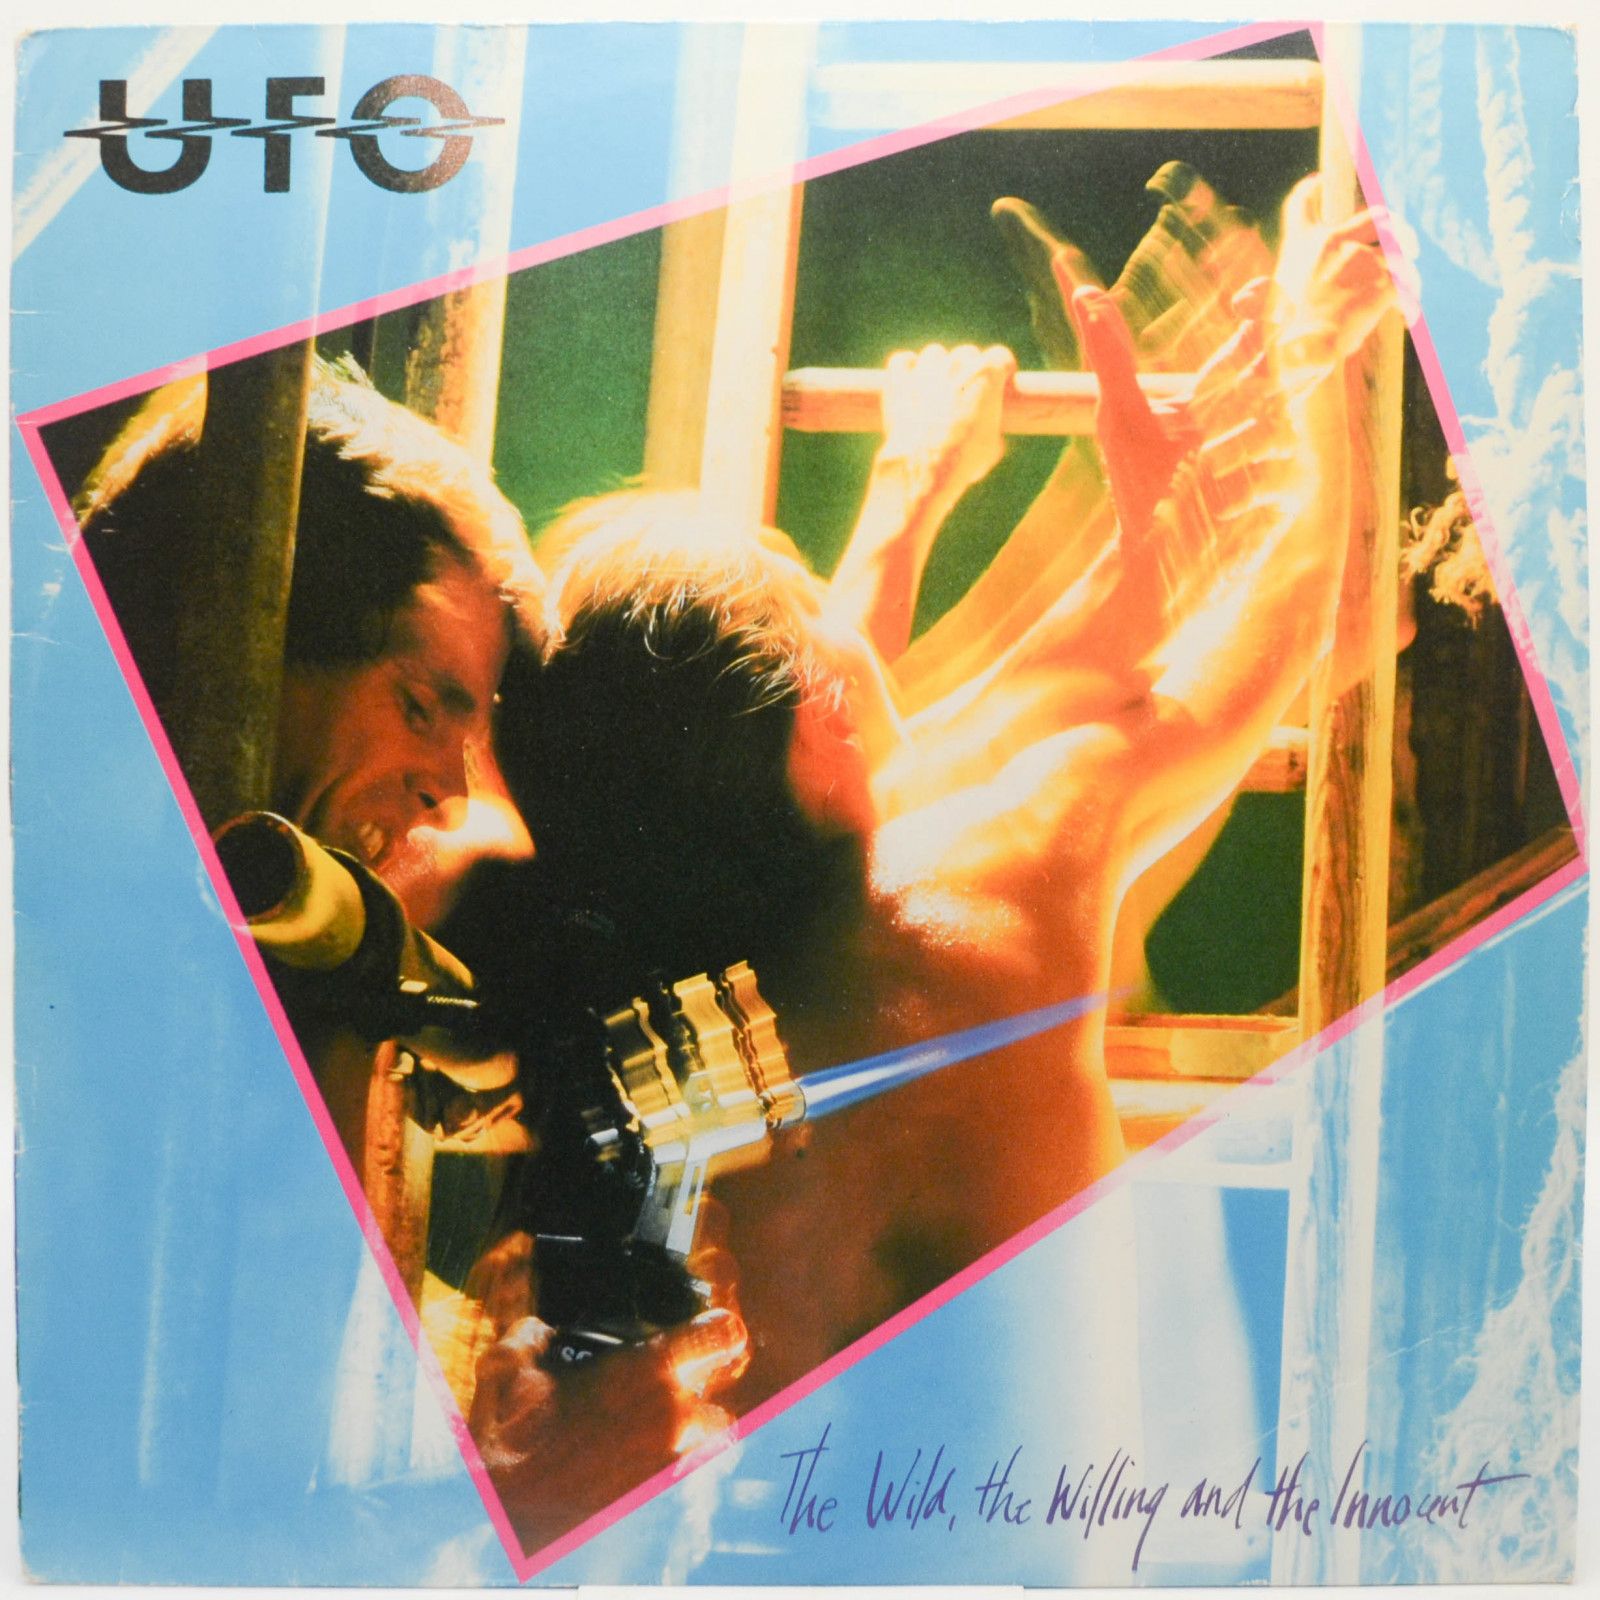 UFO — The Wild, The Willing And The Innocent, 1981